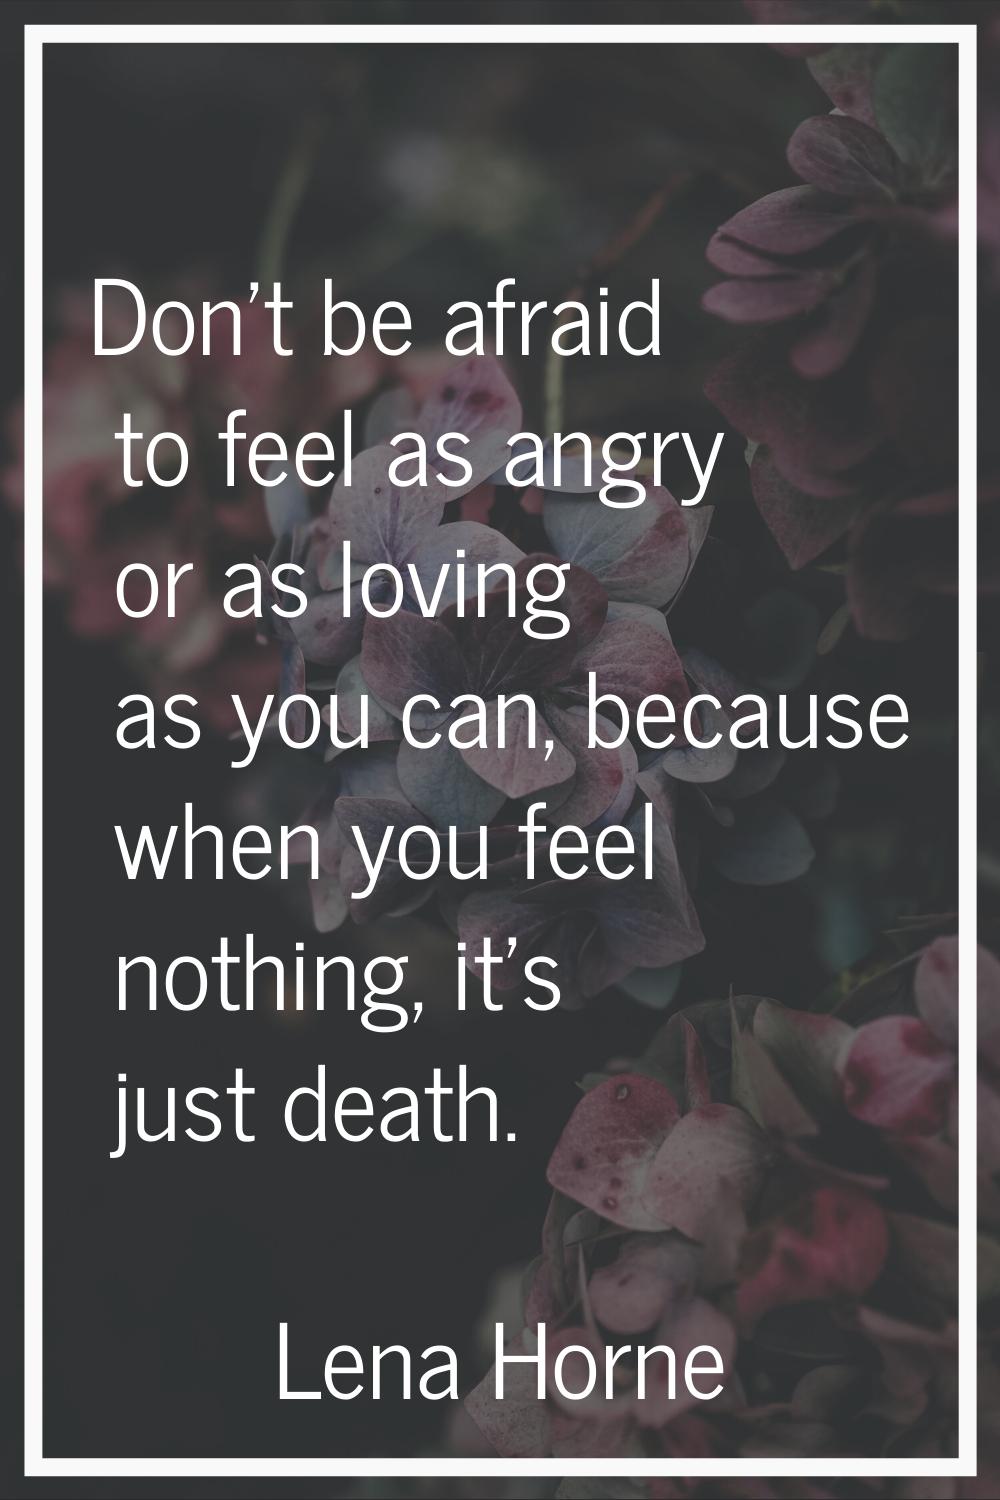 Don't be afraid to feel as angry or as loving as you can, because when you feel nothing, it's just 